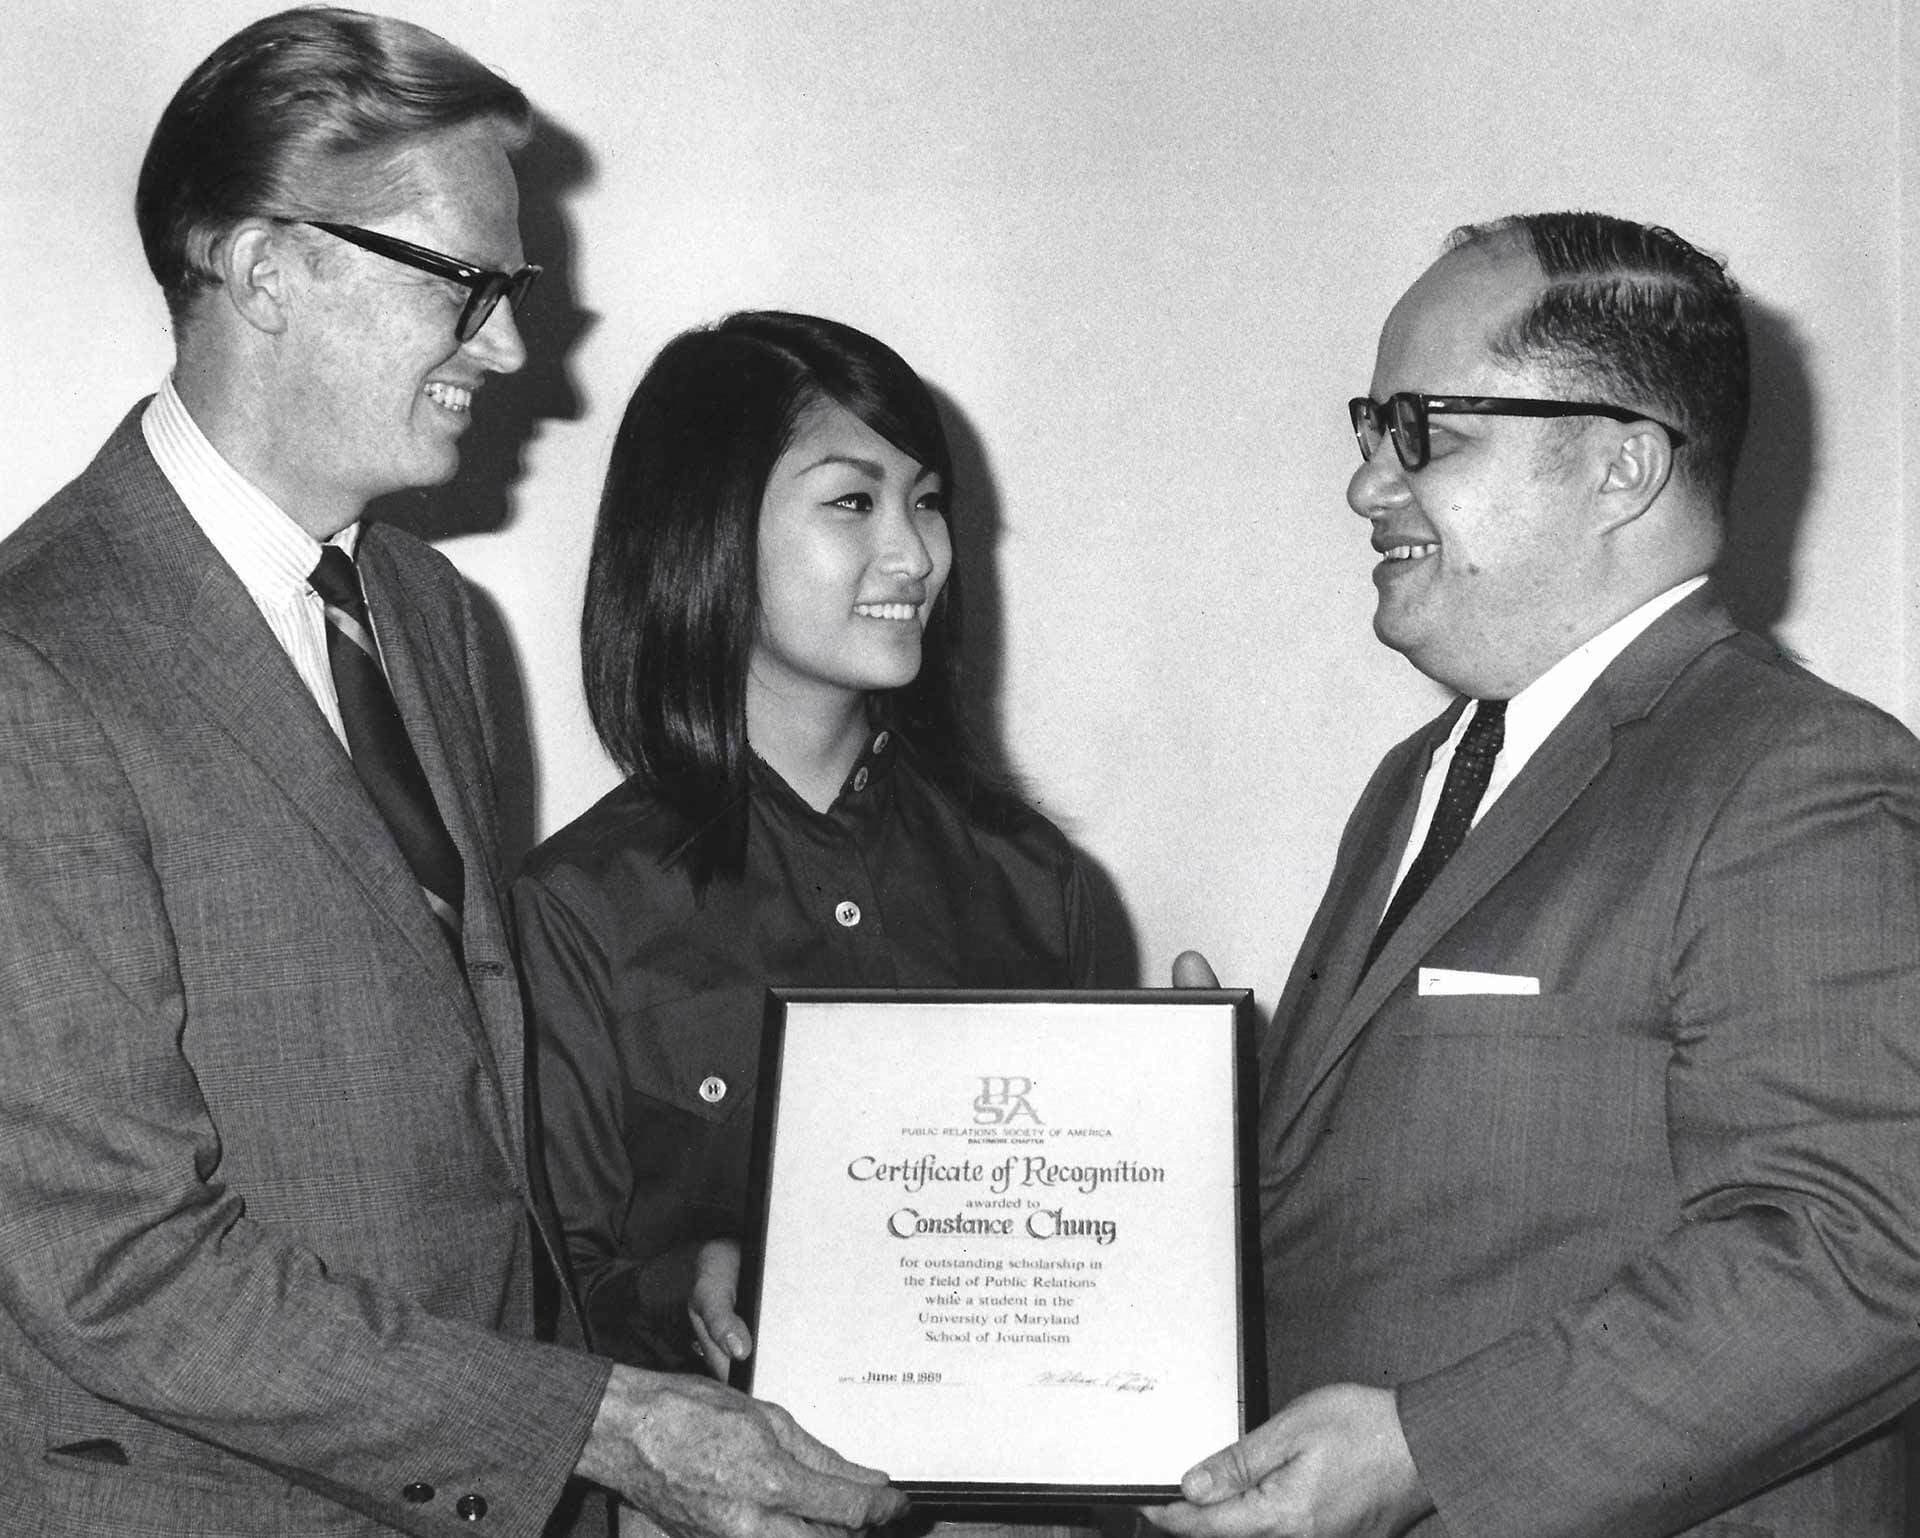 Hiebert and Connie Chung